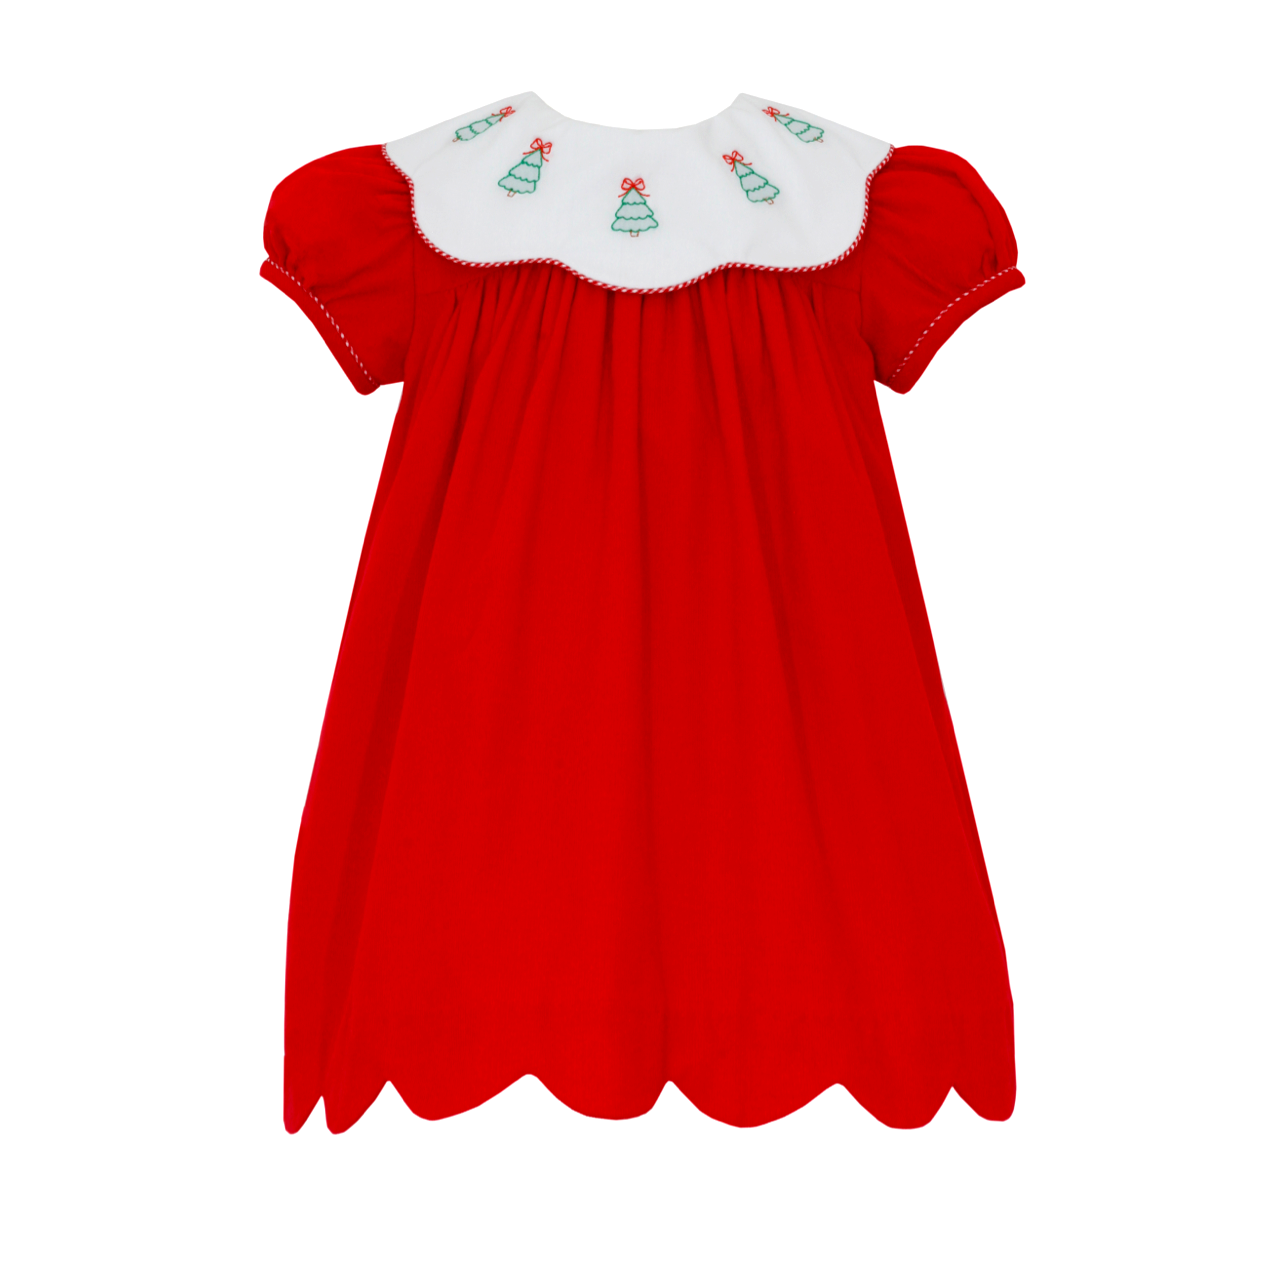 Girls Red Corduroy Scalloped Collar Dress with Christmas Tree Embroidery